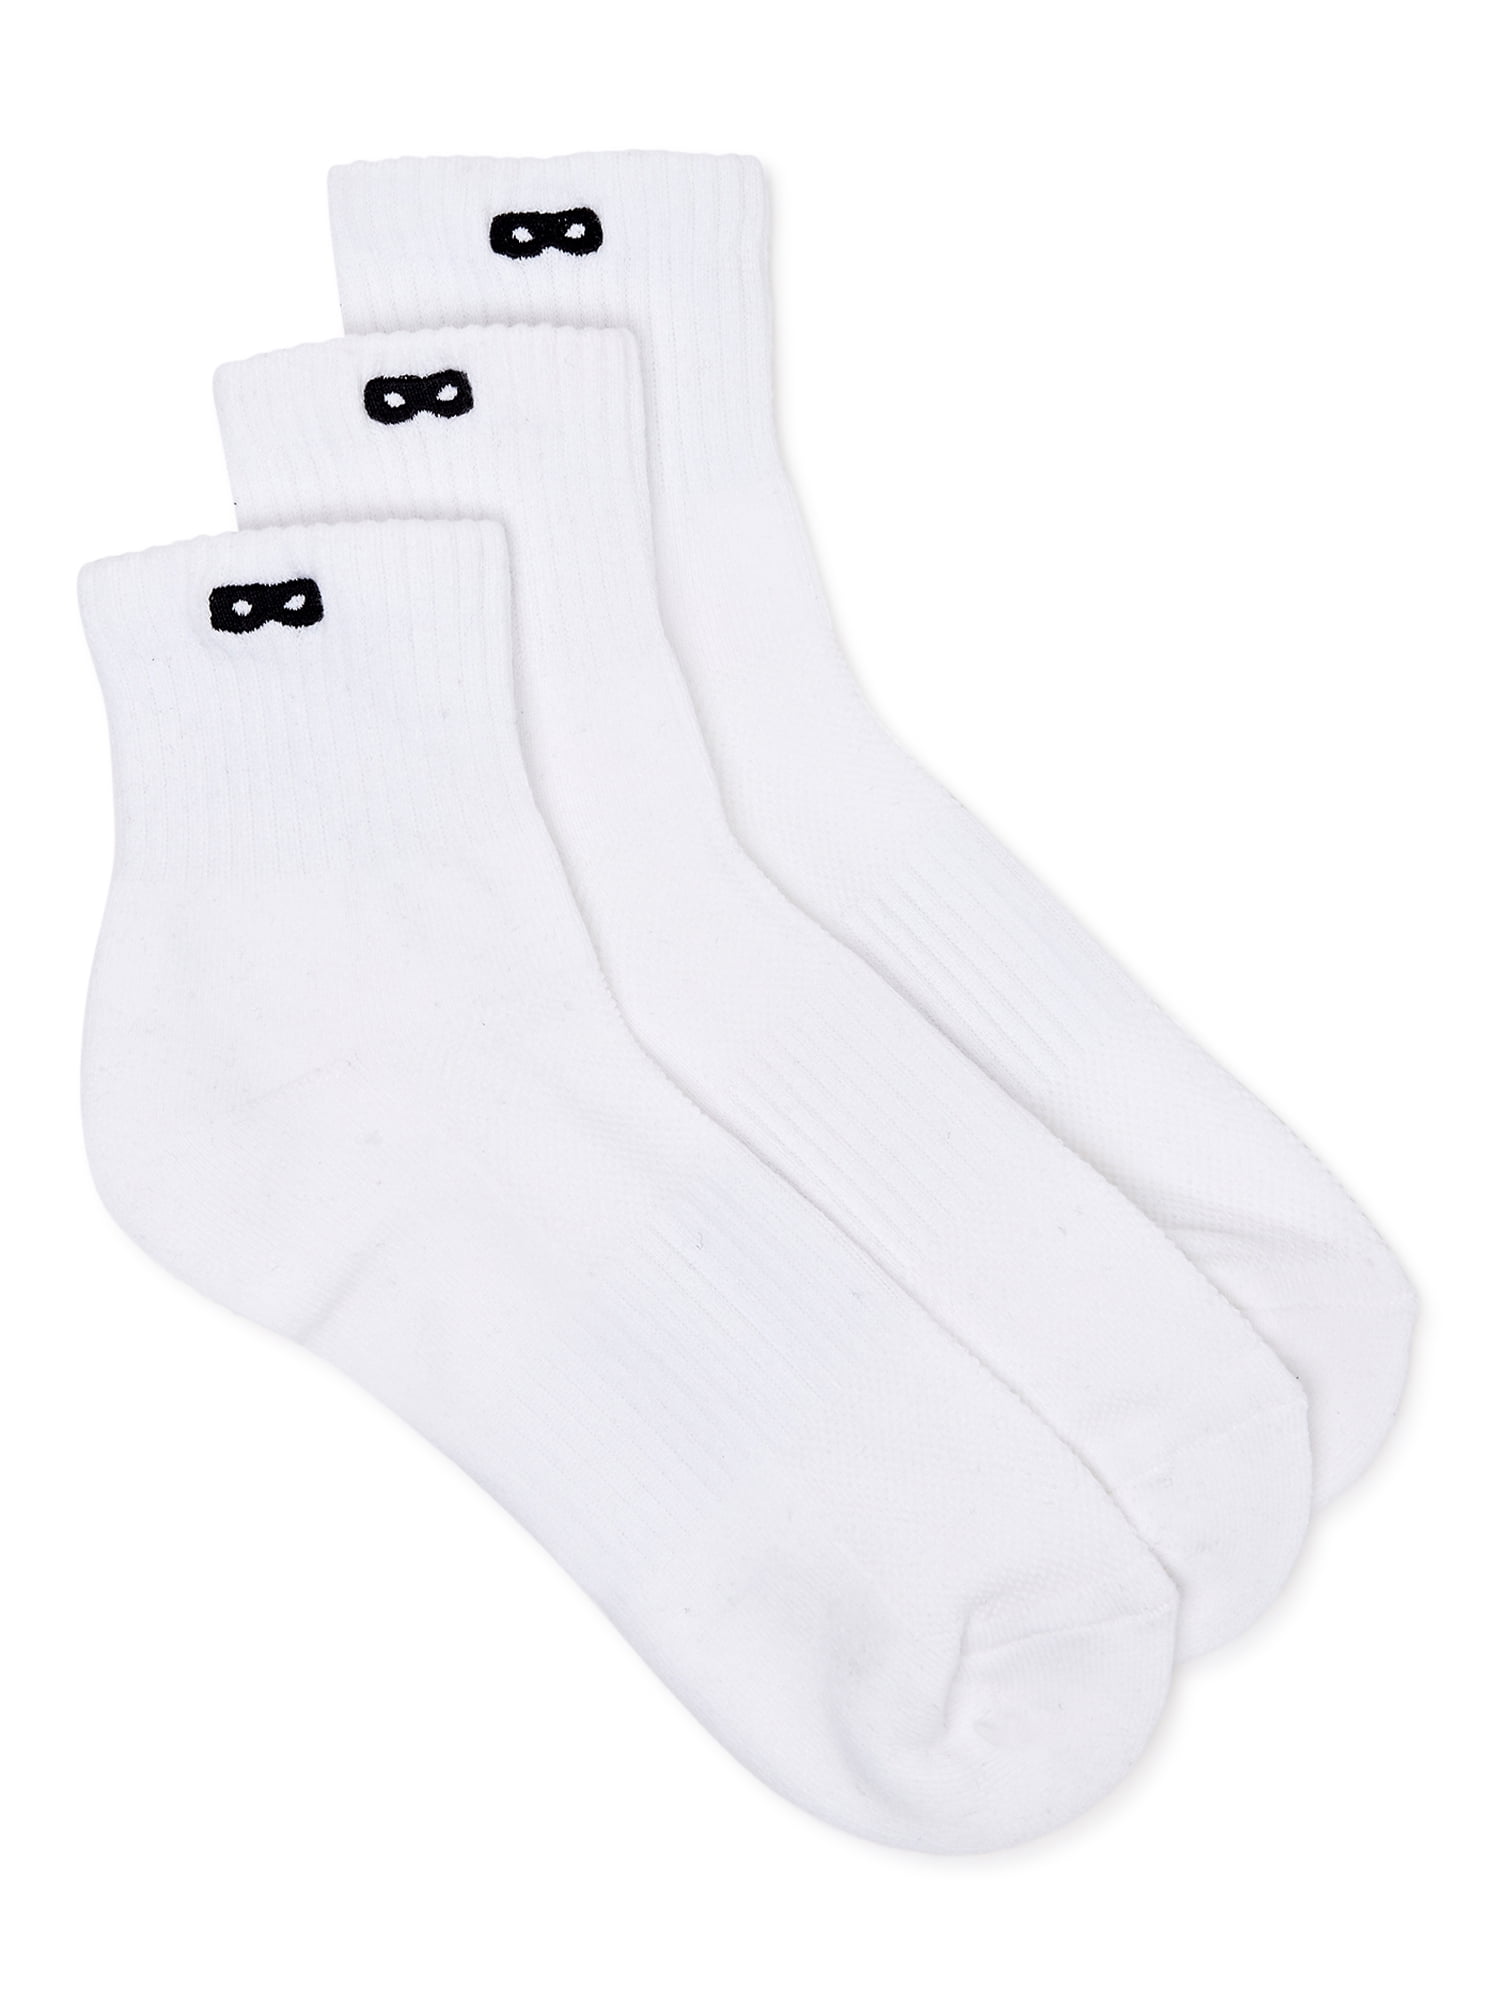 Pair of Thieves Blackout/Whiteout Cushion Ankle Sock Men's 3-Pack ...